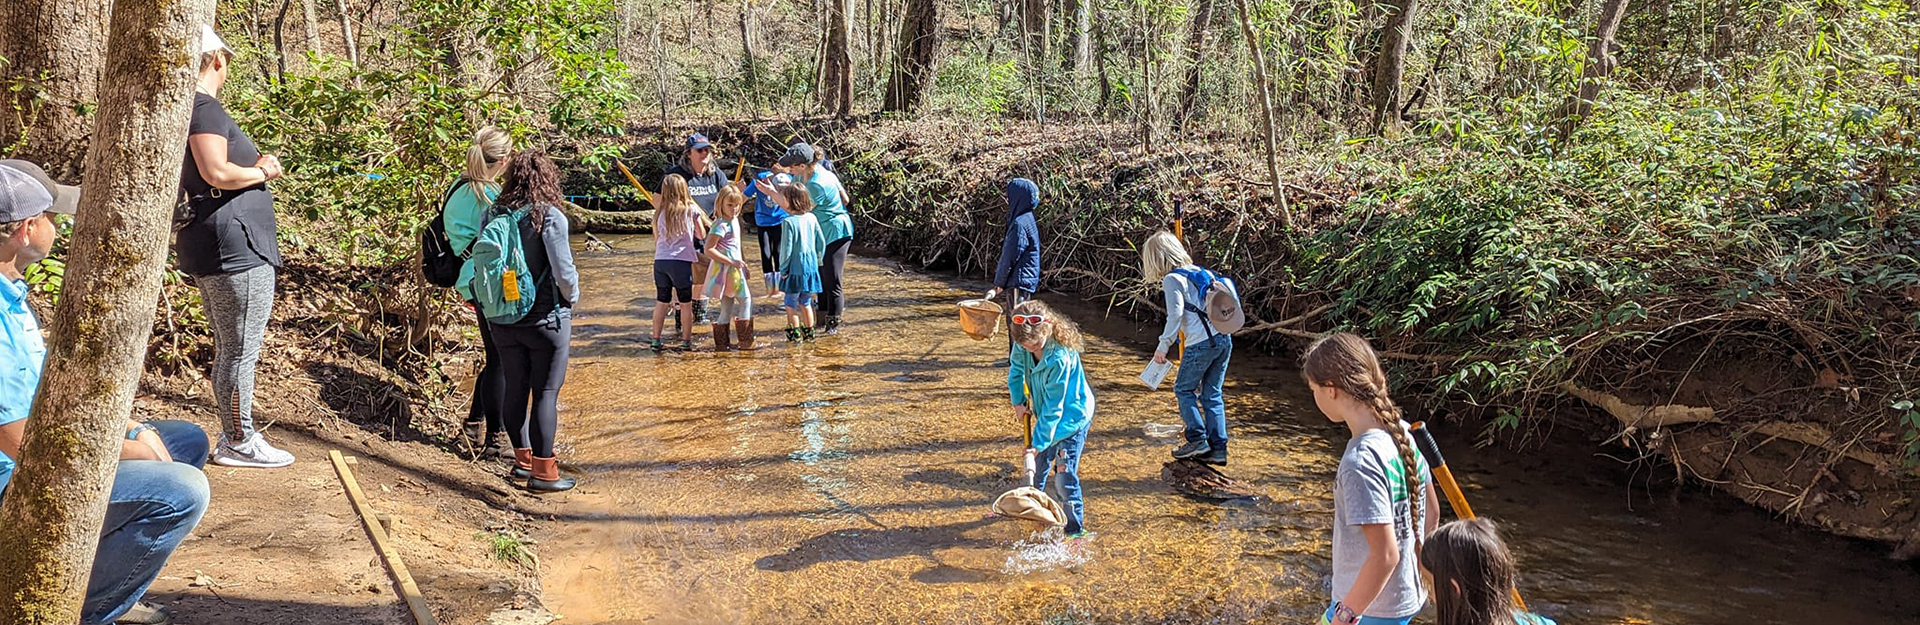 kids exploring the river during 4-H20 summer camp